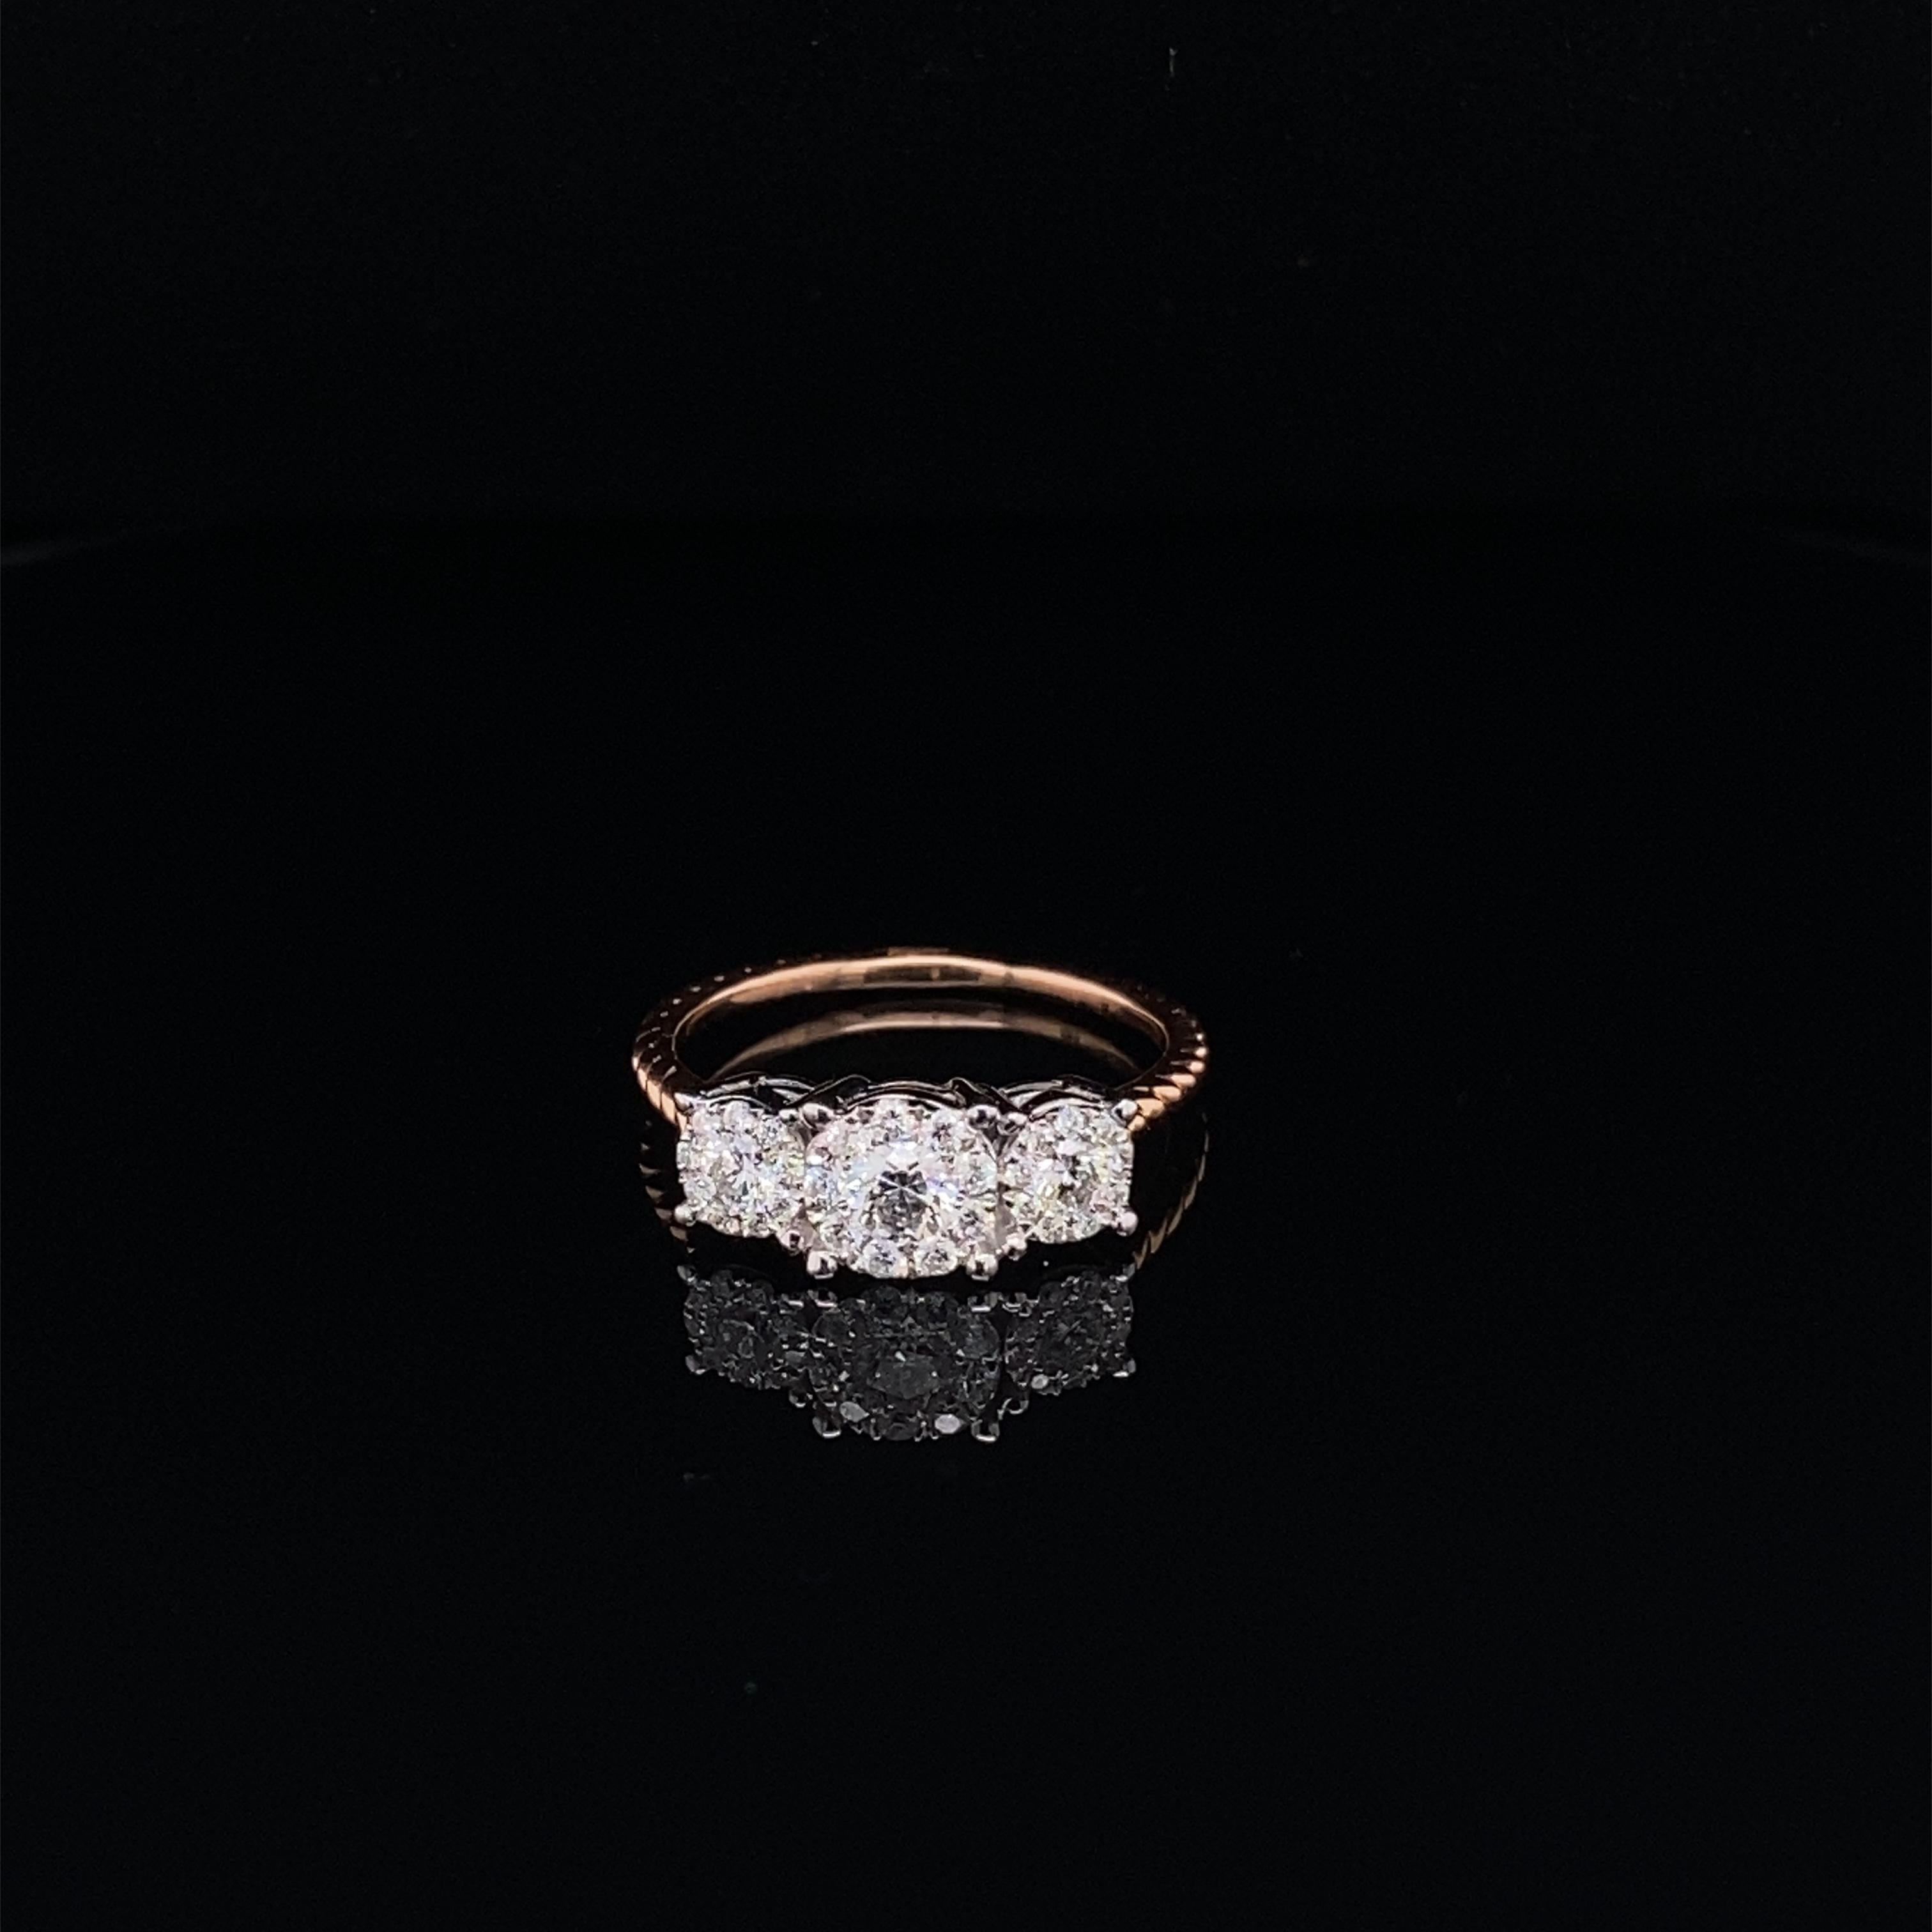 This stunning ring features 3 radiant Round Clusters of White Diamonds comprising of Round Diamonds.
This ring is set in 14K Rose Gold, with a 14K White Gold setting for the stones.
Total Diamond Weight = 0.55 Carats. Ring Size is 6 1/2.